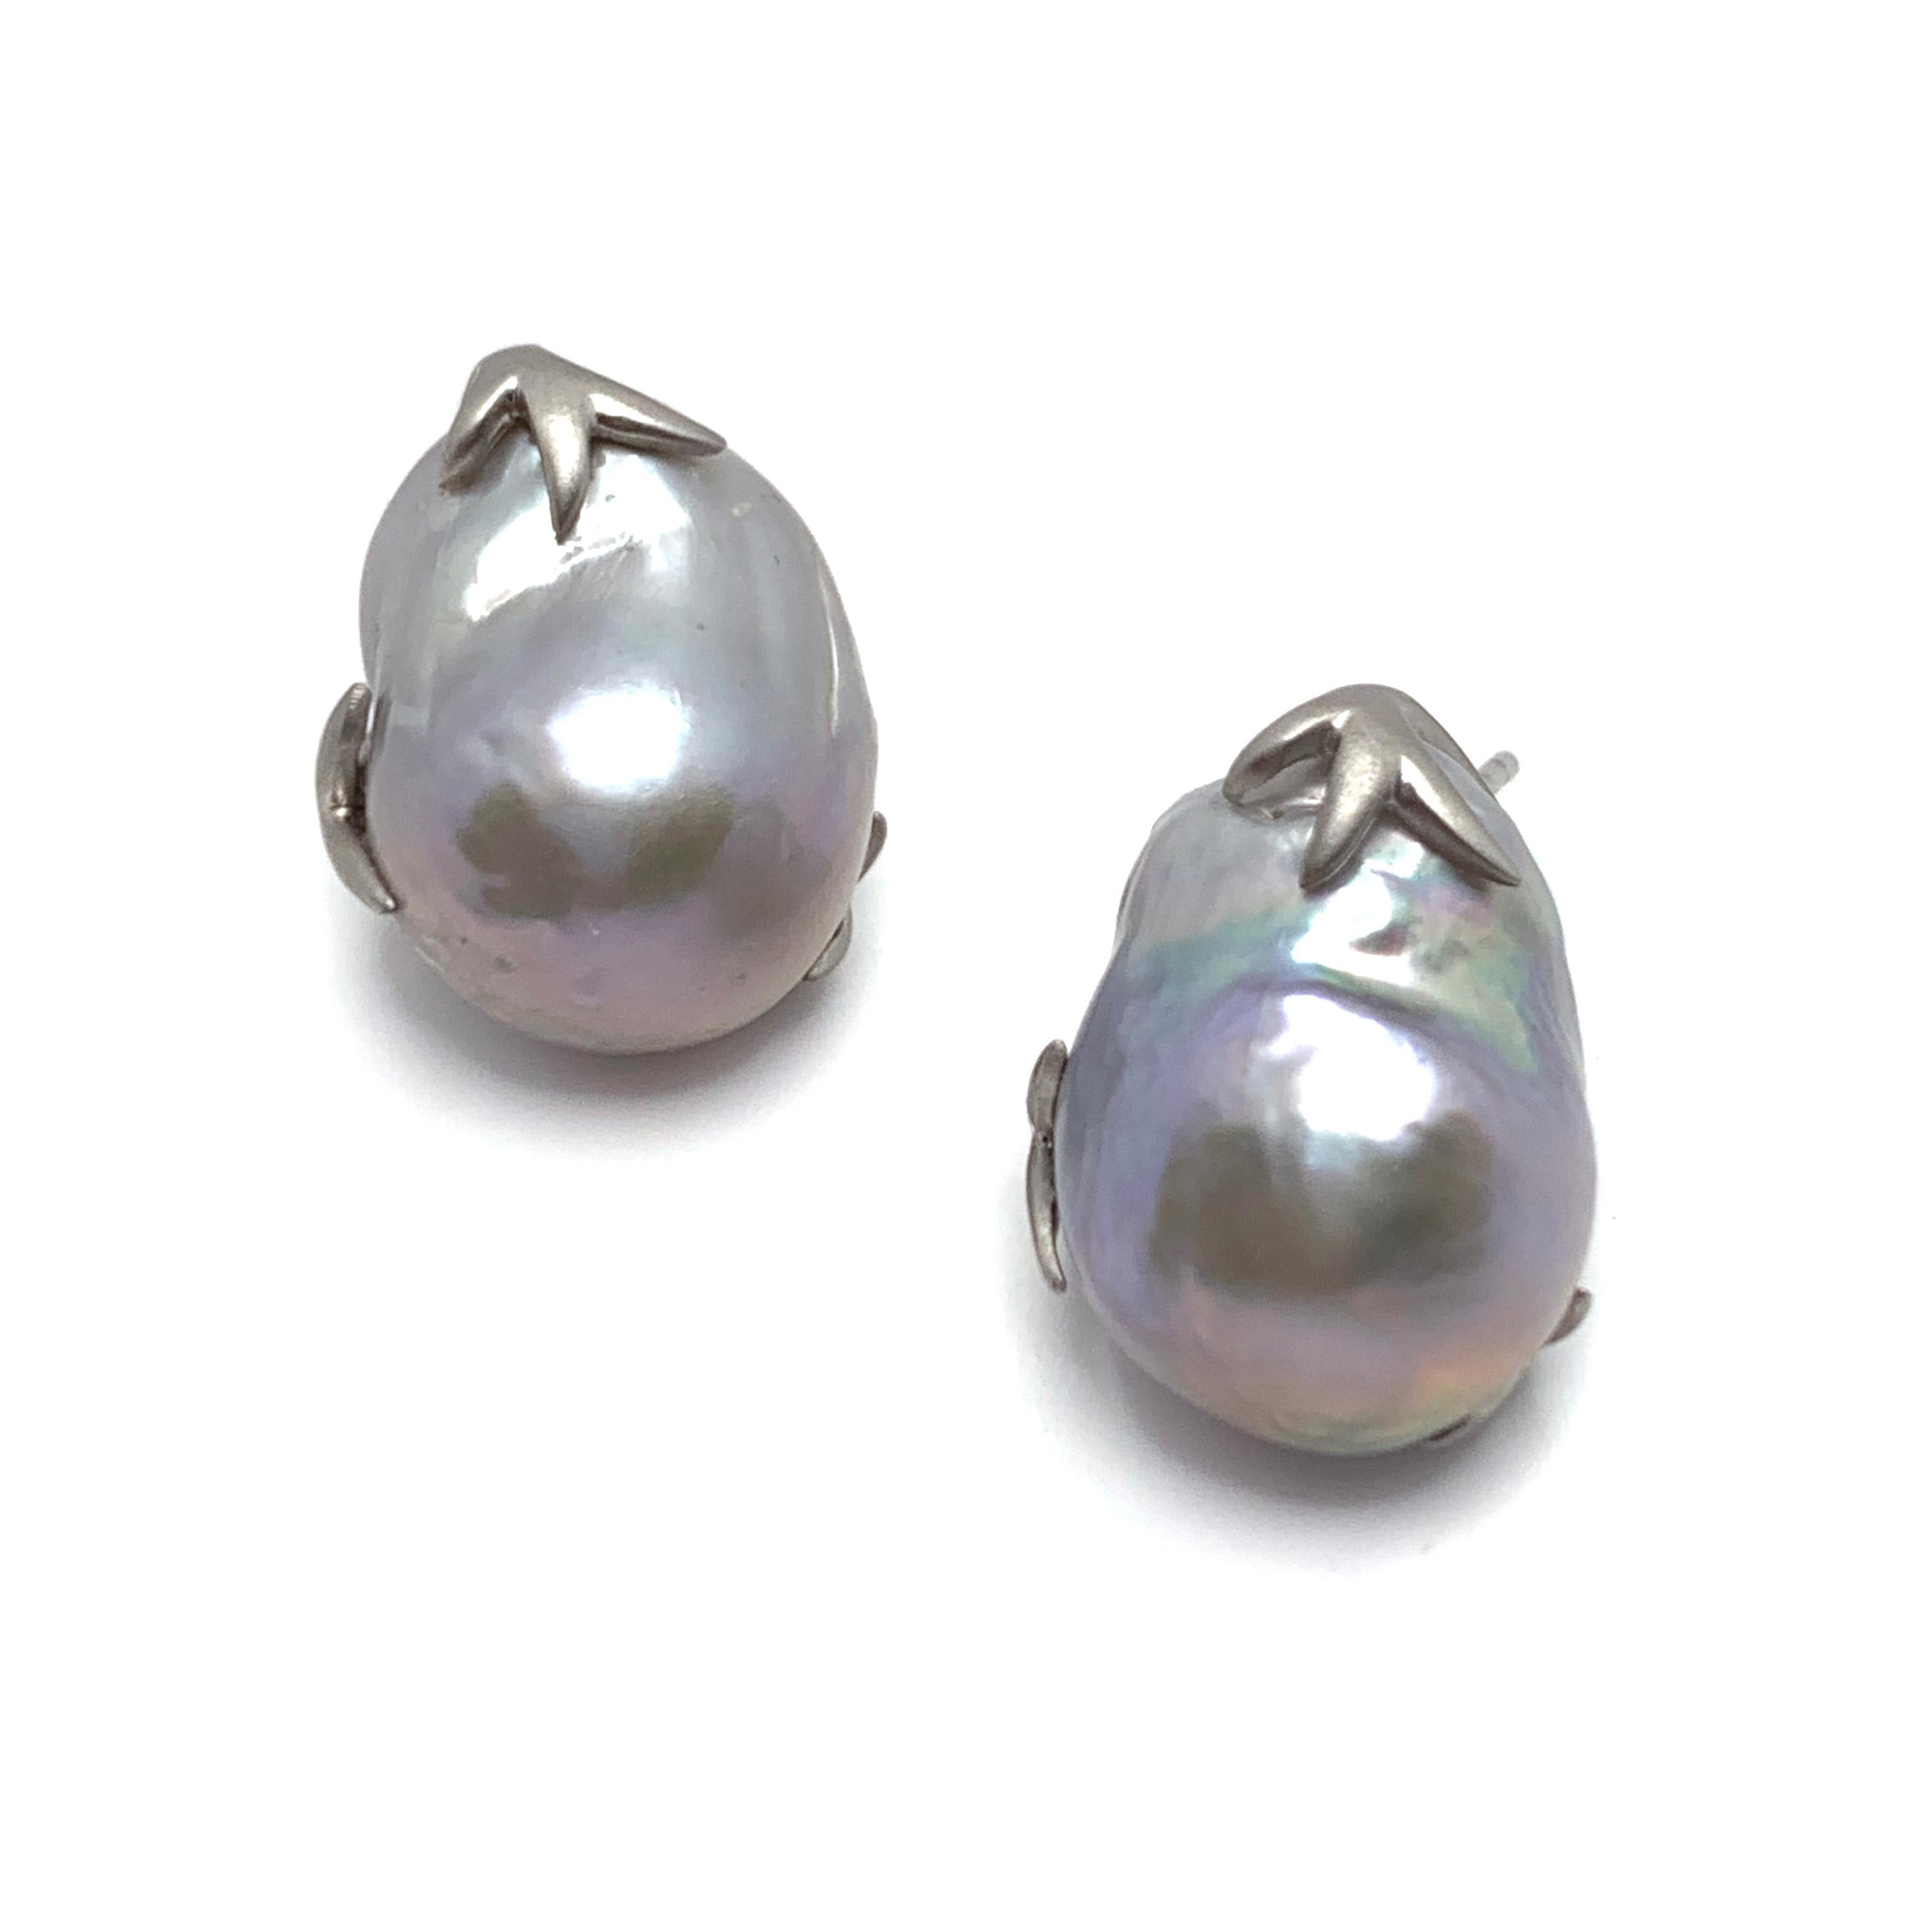 Beautiful pair of large lustrous grey freshwater baroque pearl earrings. The pair measures 15mm width and 20mm height, handset in platinum rhodium plated sterling silver (matte finish). Post-clip backs provide addition support and allow the earrings